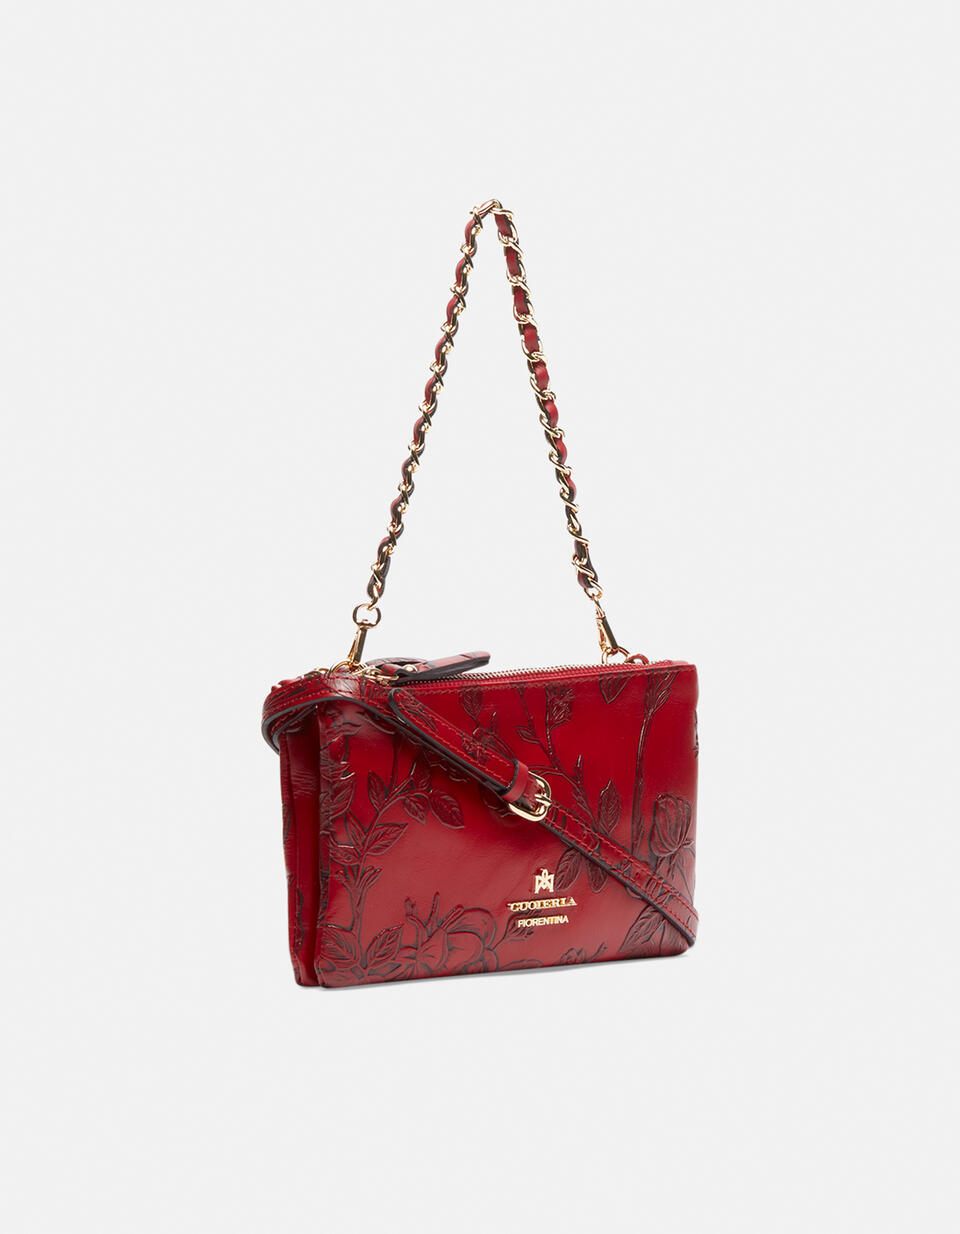 Double clutch bag in rose embossed printed leather - Crossbody Bags - WOMEN'S BAGS | bags ROSSO - Crossbody Bags - WOMEN'S BAGS | bagsCuoieria Fiorentina